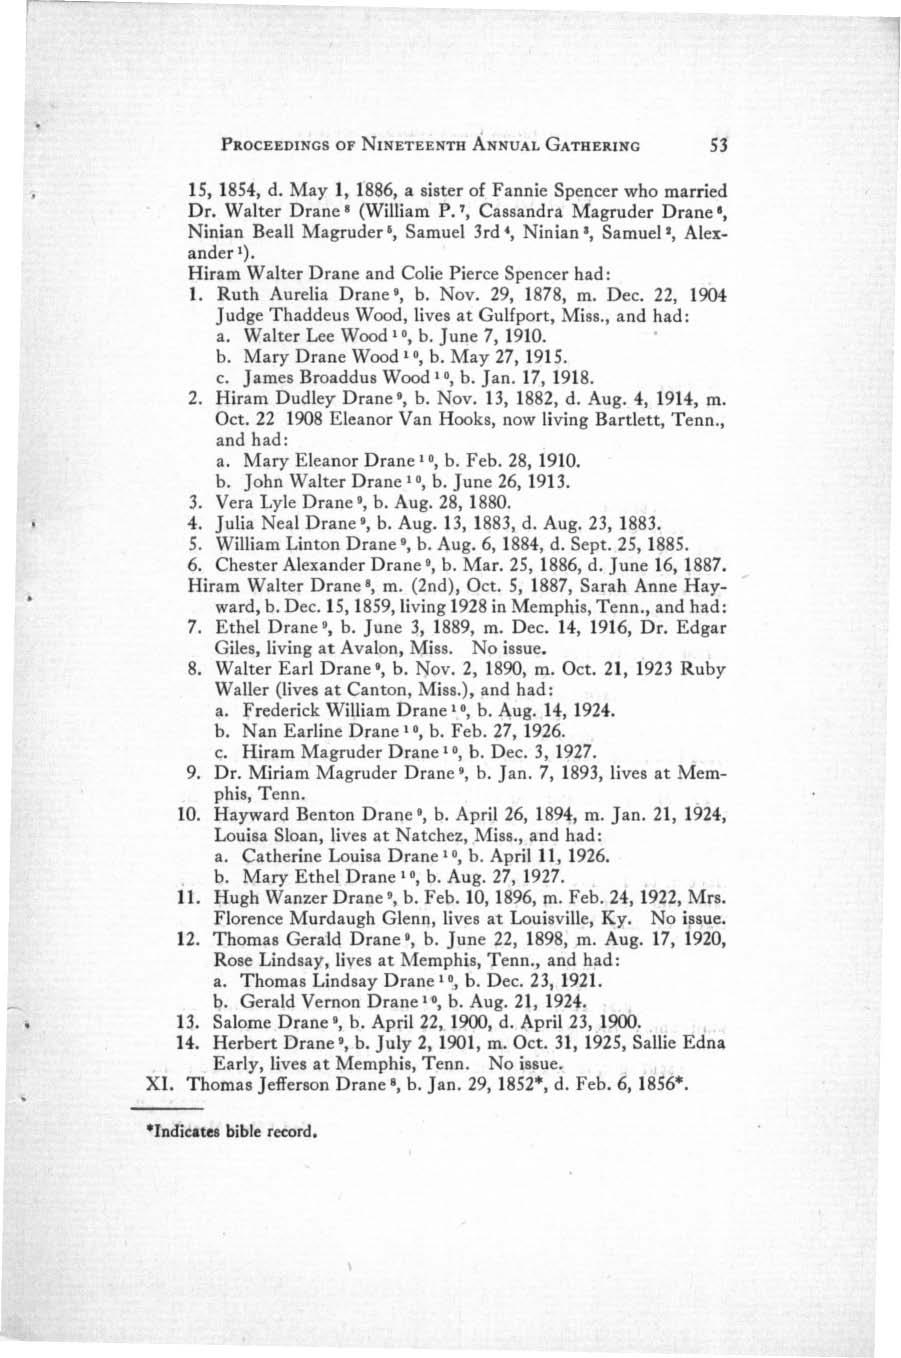 PROCE EDI NGS OF N INETEENTH A NNUAL GATHERING 53 15, 1854, d. May 1, 1886, a sister of Fannie Spencer who married Dr. Walter Drane 8 (William P.